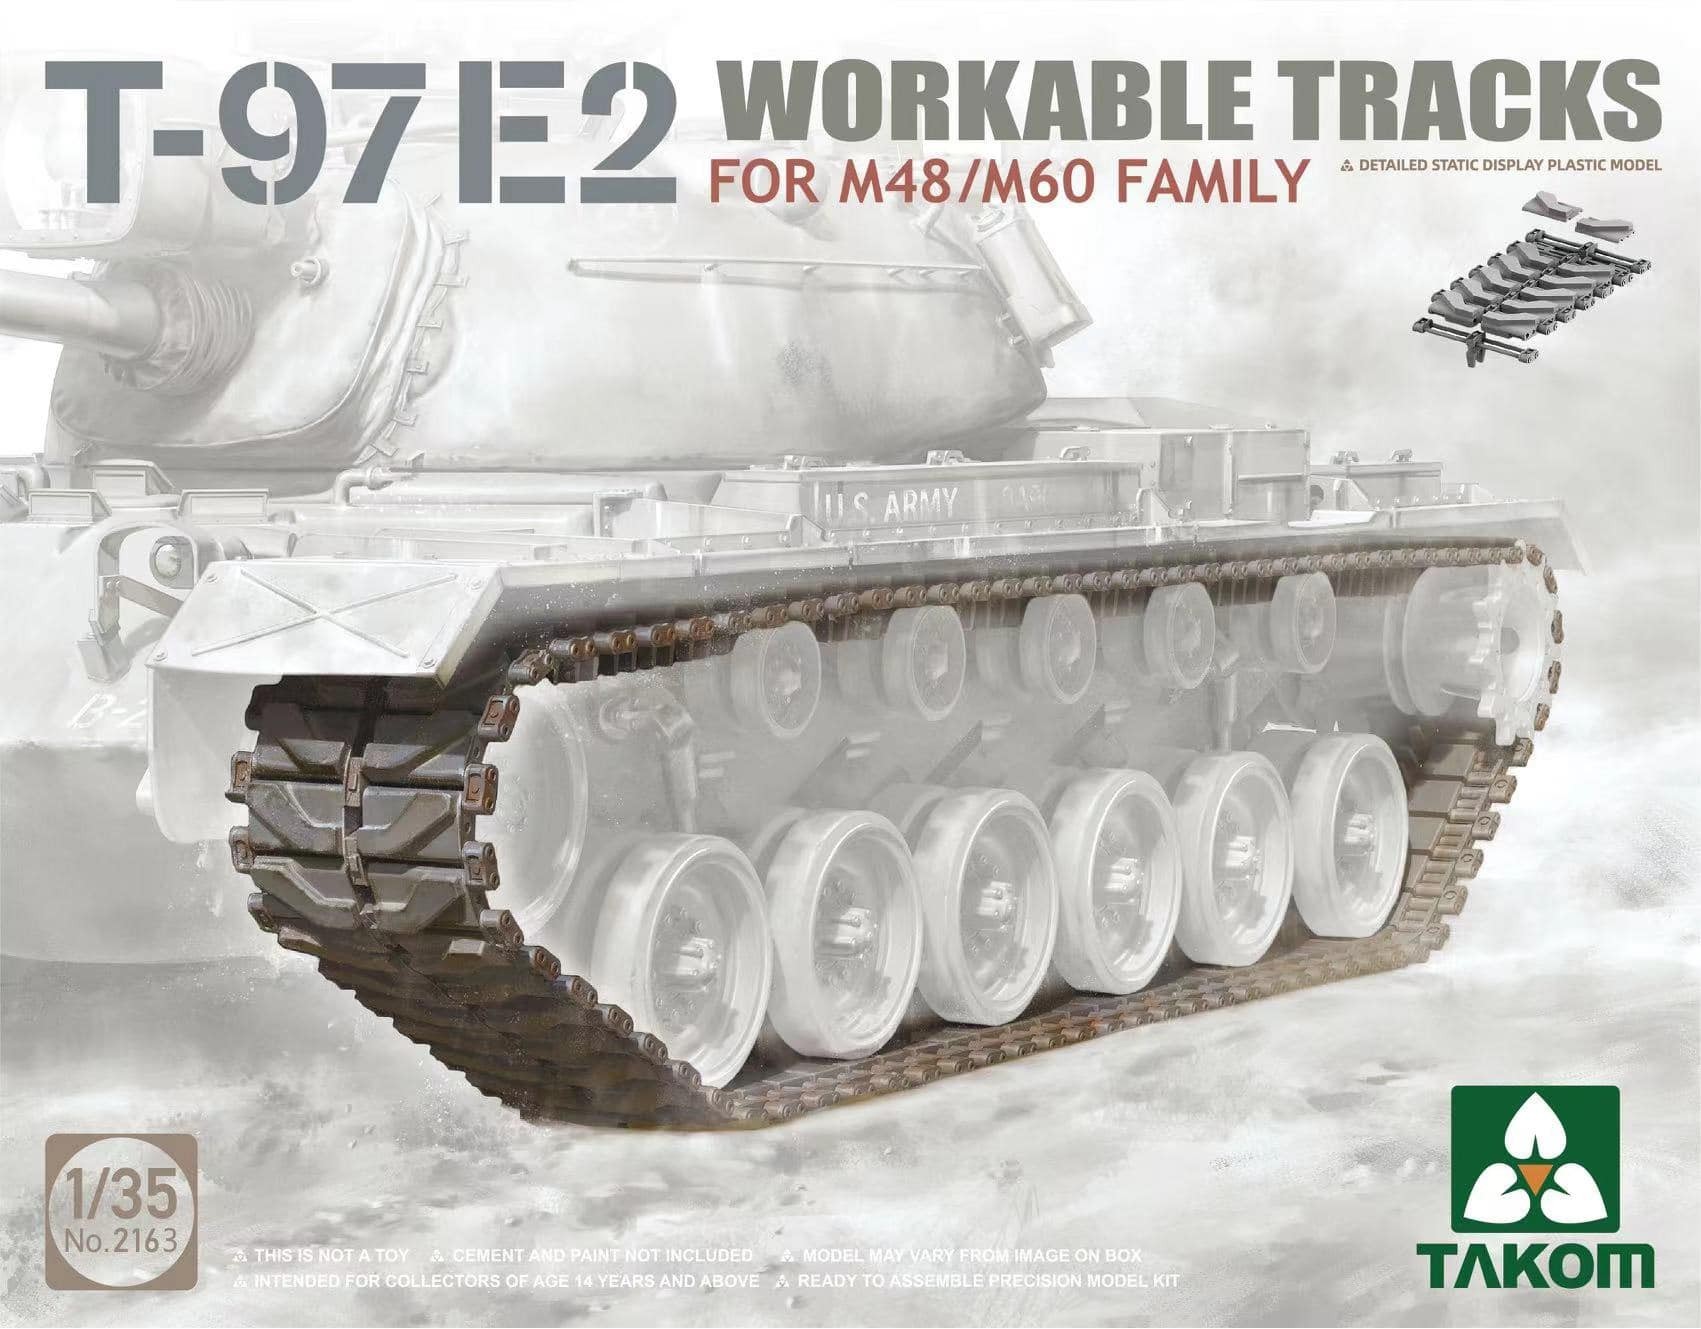 2163 - T97E2 Workable Tracks